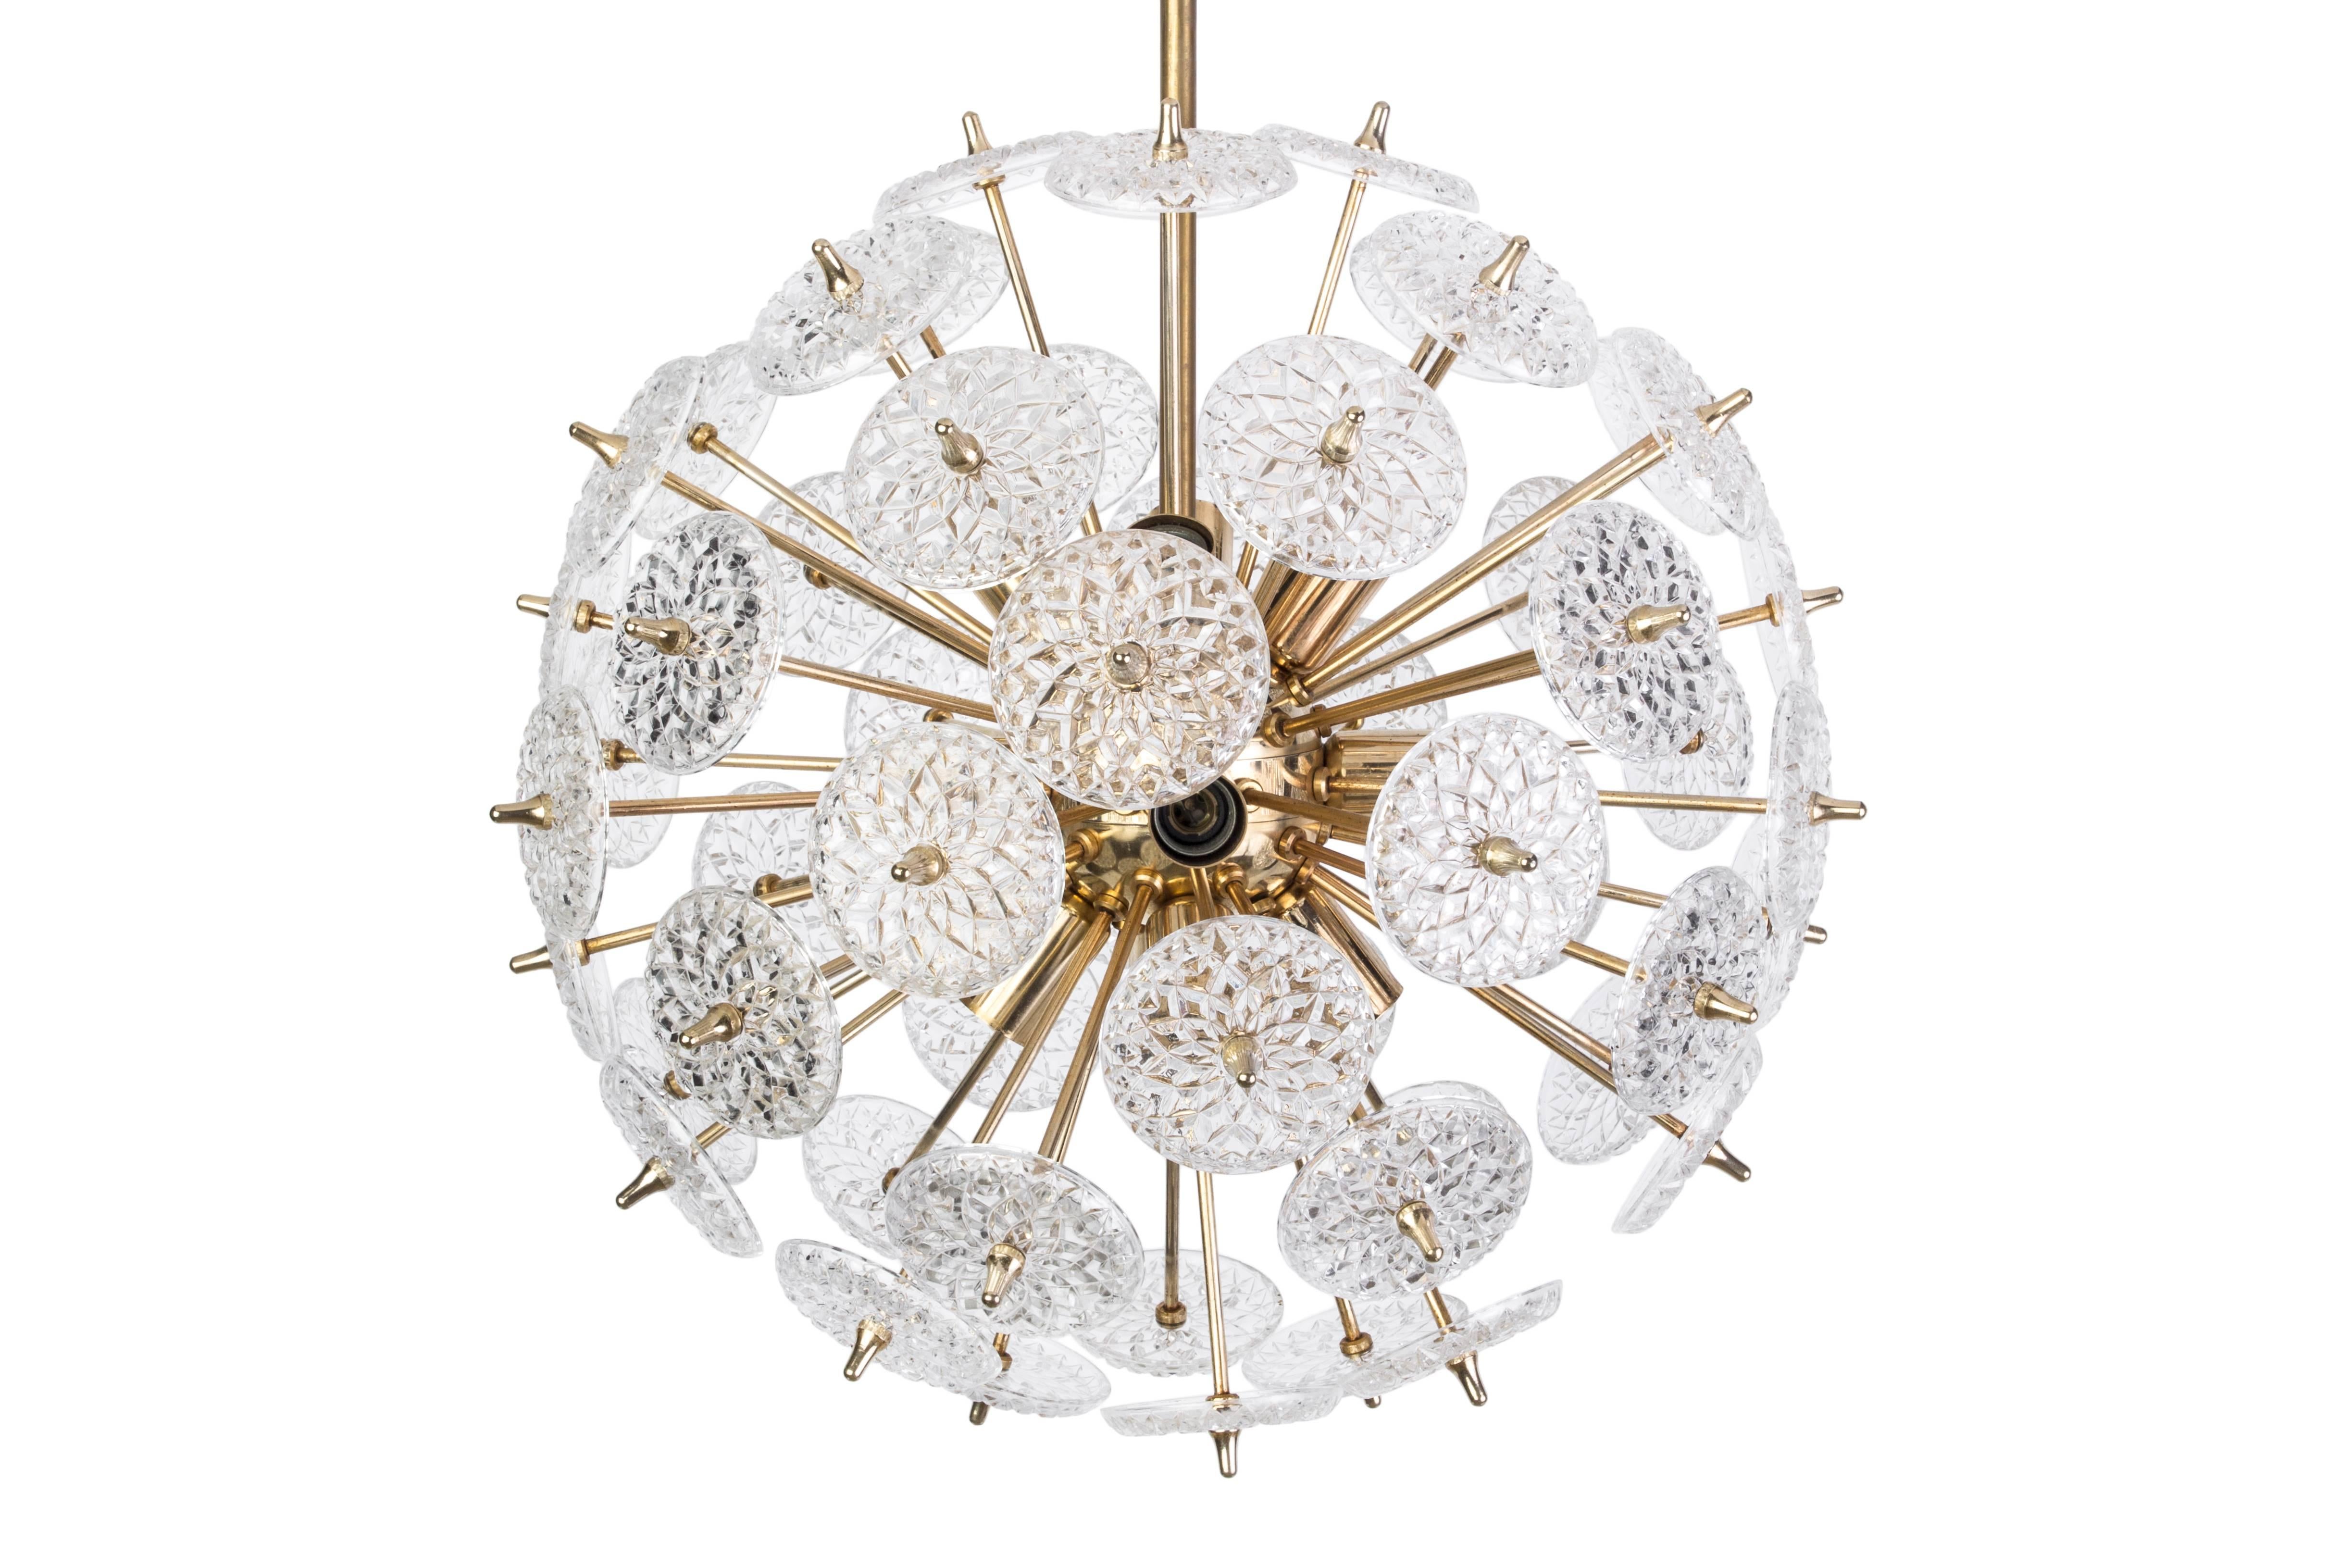 This exquisite Mid-Century Modernist floral Sputnik was created by the prolific Val Saint Lambert. It features twelve lights, on a starburst design form in brass with stylized floral cut crystal discs surrounding the base. It has been newly rewired